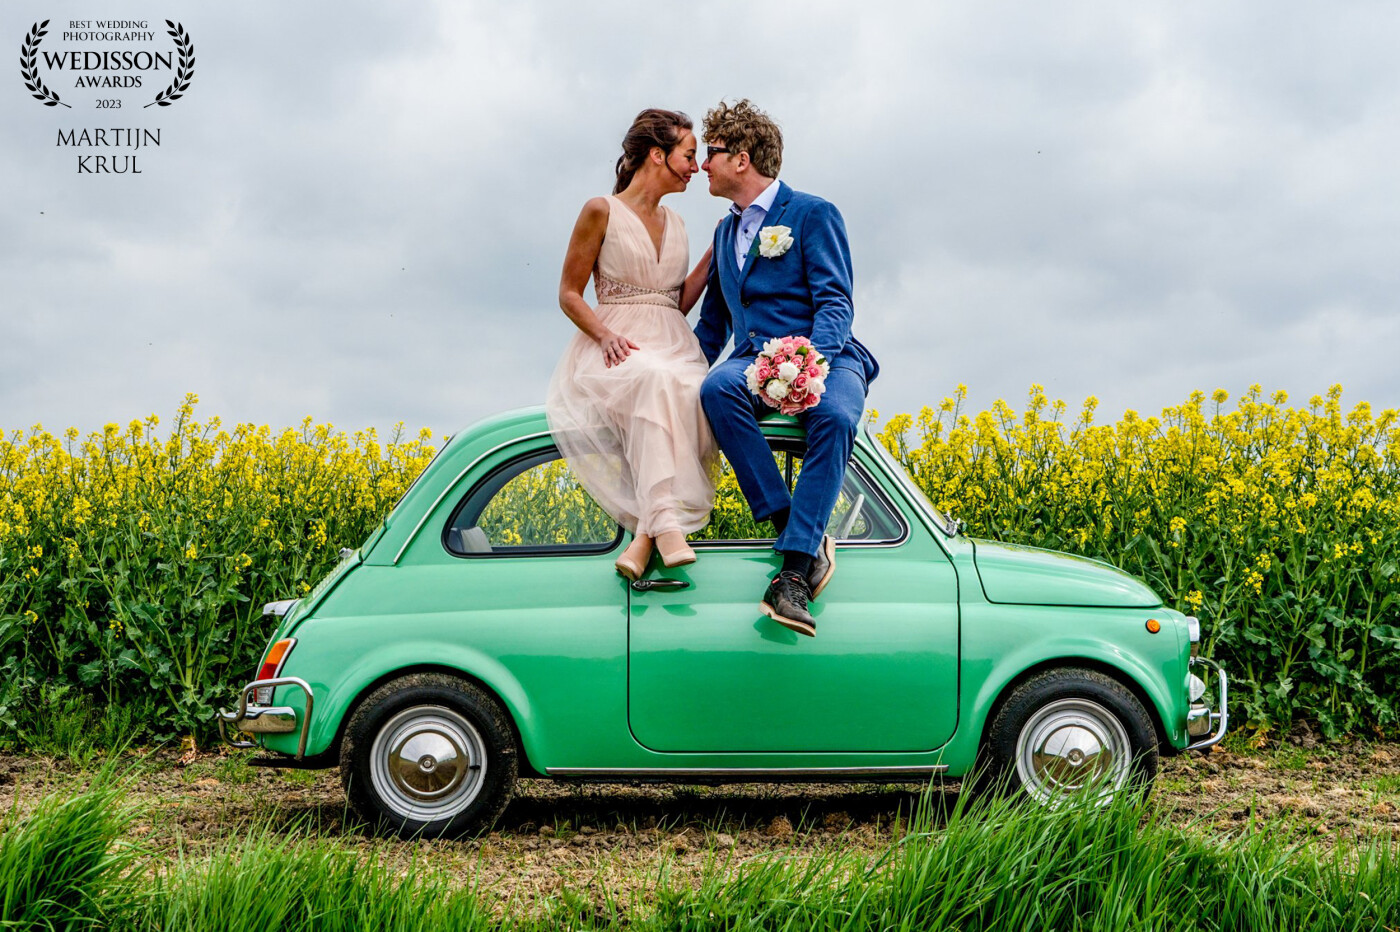 As a wedding photographer, you have a unique opportunity to freeze moments in time and turn them into everlasting memories. This lovely couple wanted to go to the rapeseed, the beauty of the rapeseed and there car gave this awesome result.